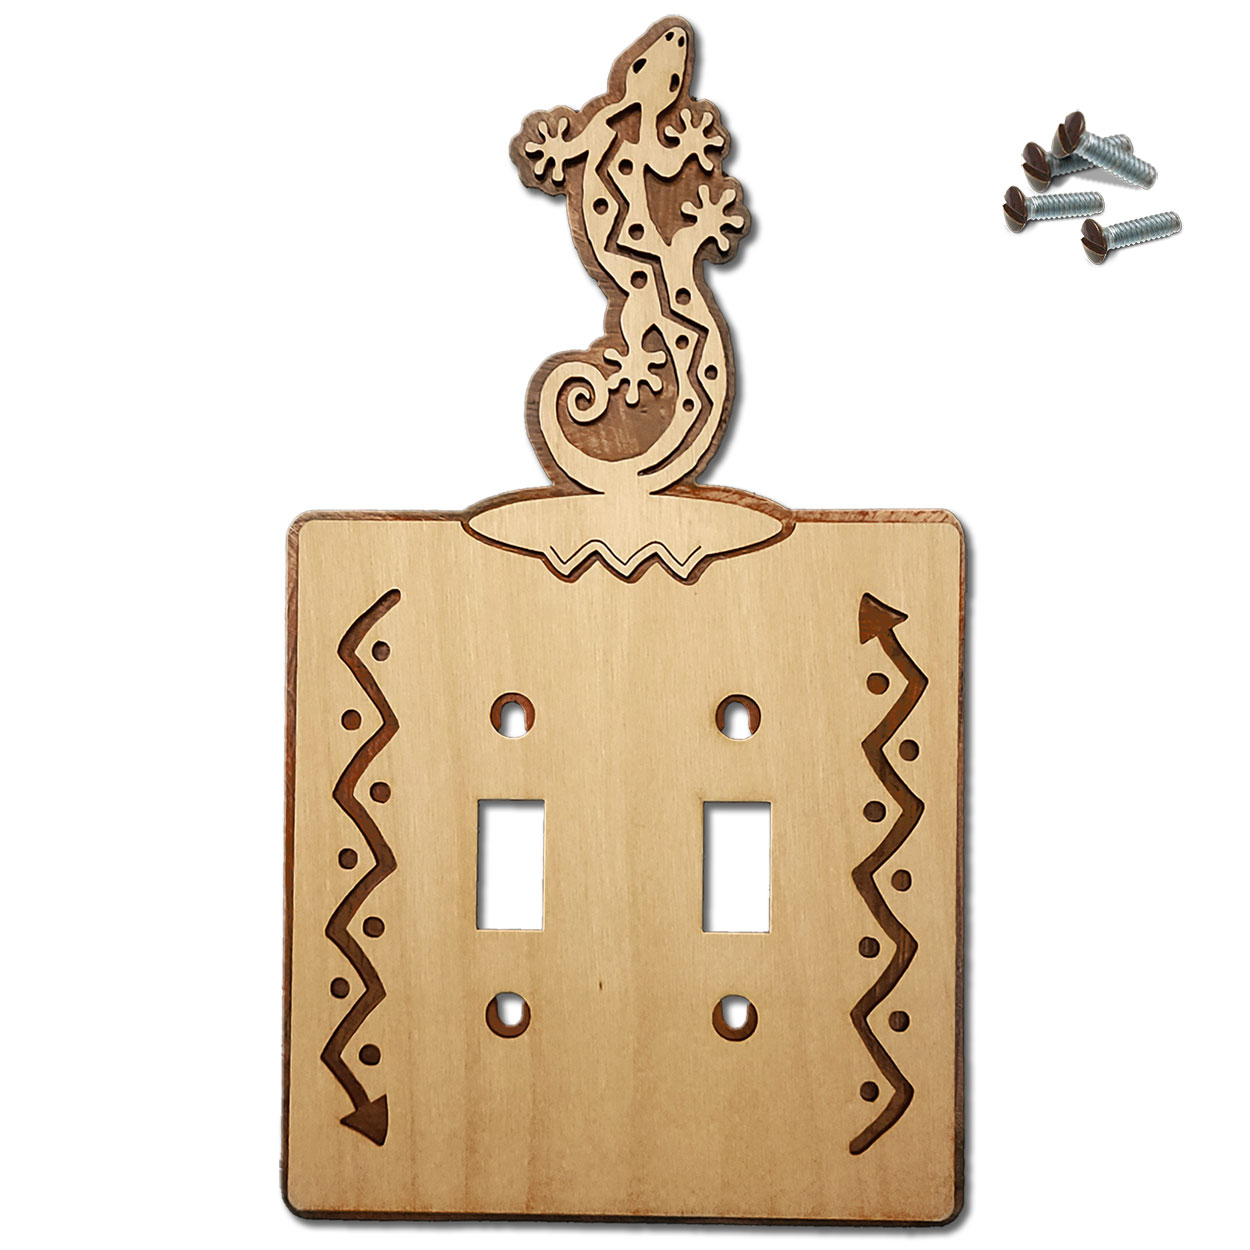 168012S -  Climbing Gecko Southwestern Decor Double Standard Switch Plate in Natural Birch